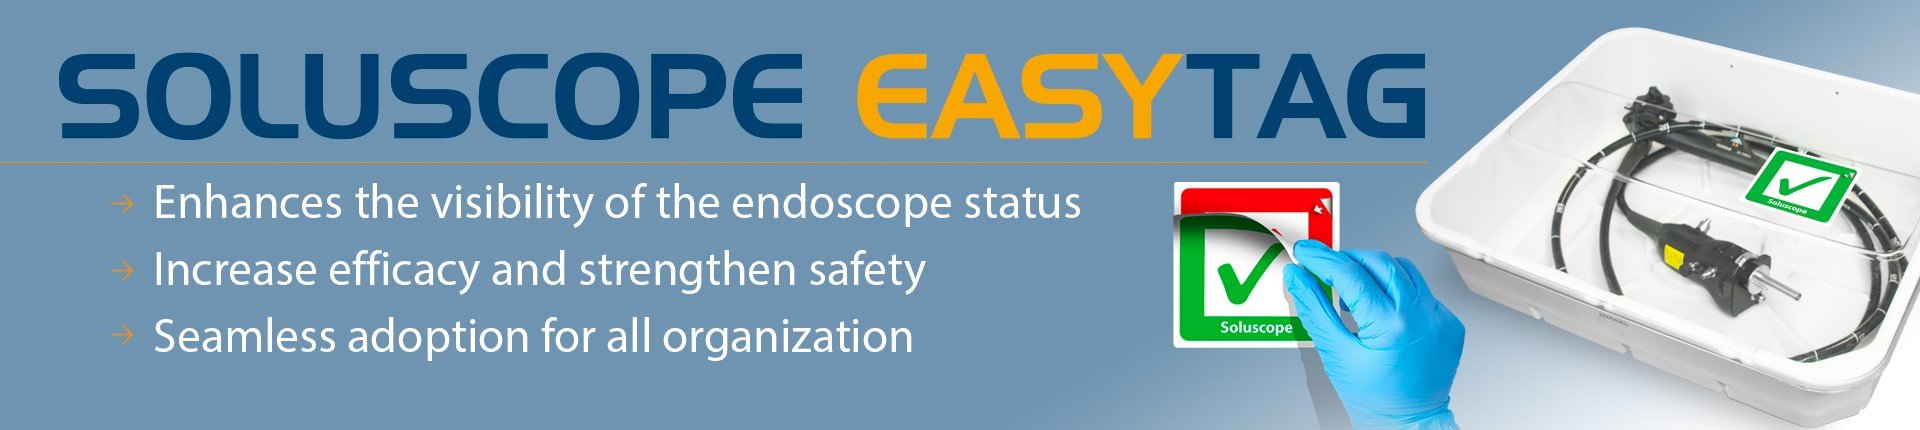 Soluscope Endoscope Reprocessing Endoscope Cleaning and disinfection hygien storage